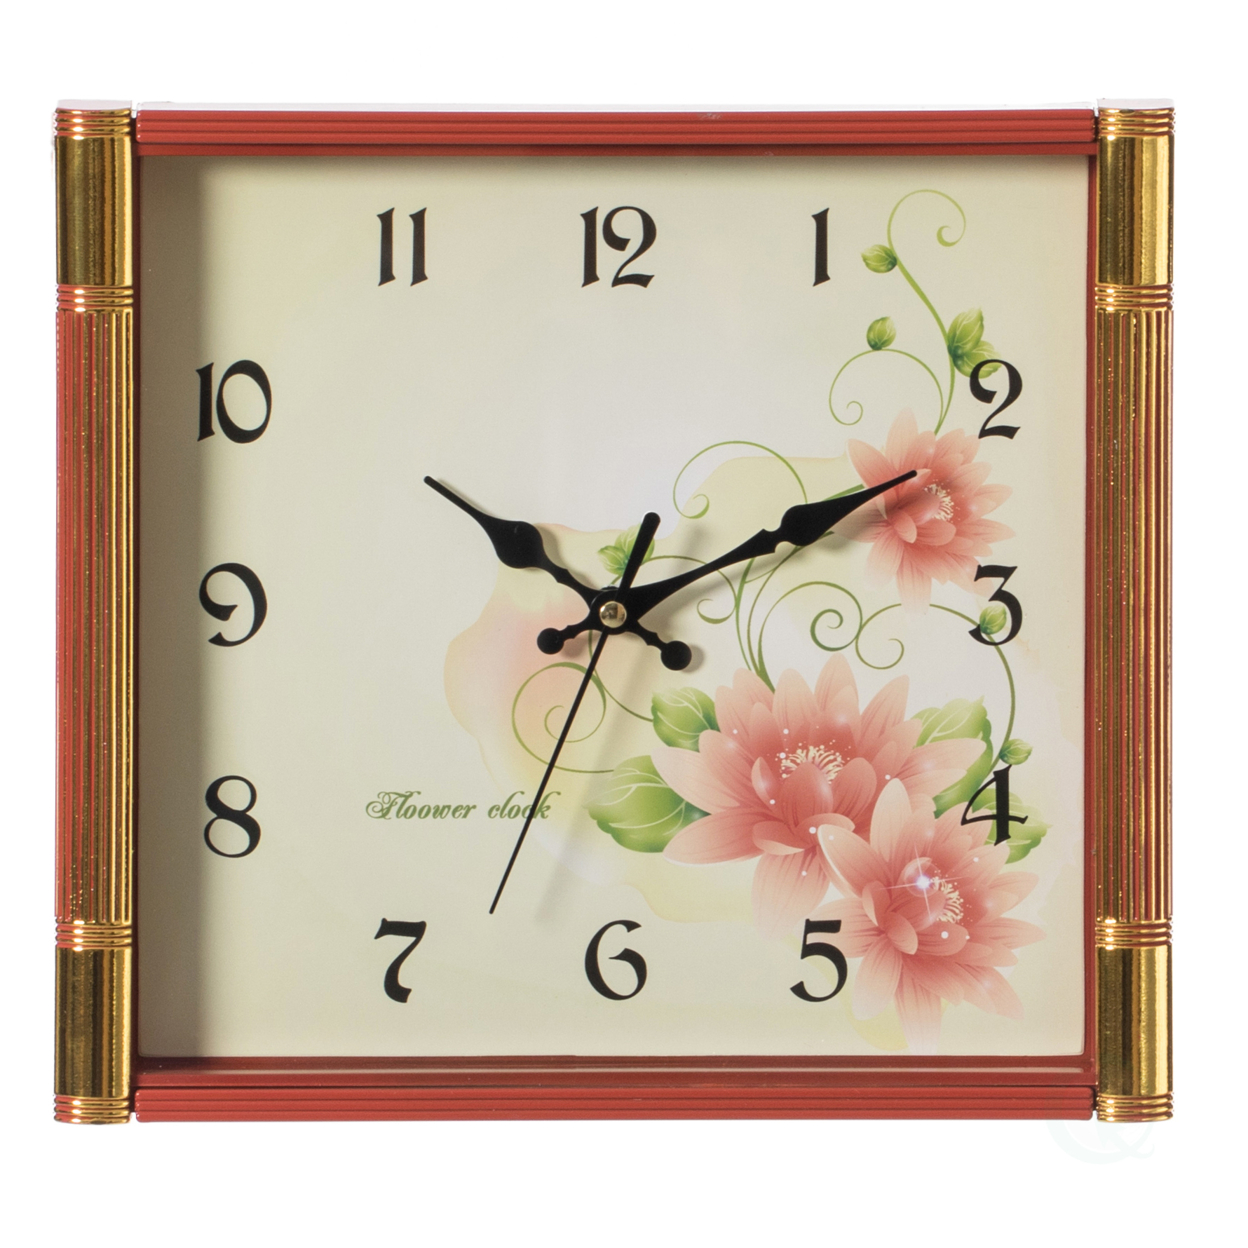 Unique Modern Square Shaped Wall Clock With Floral Design For Living Room, Kitchen, Or Dining Room